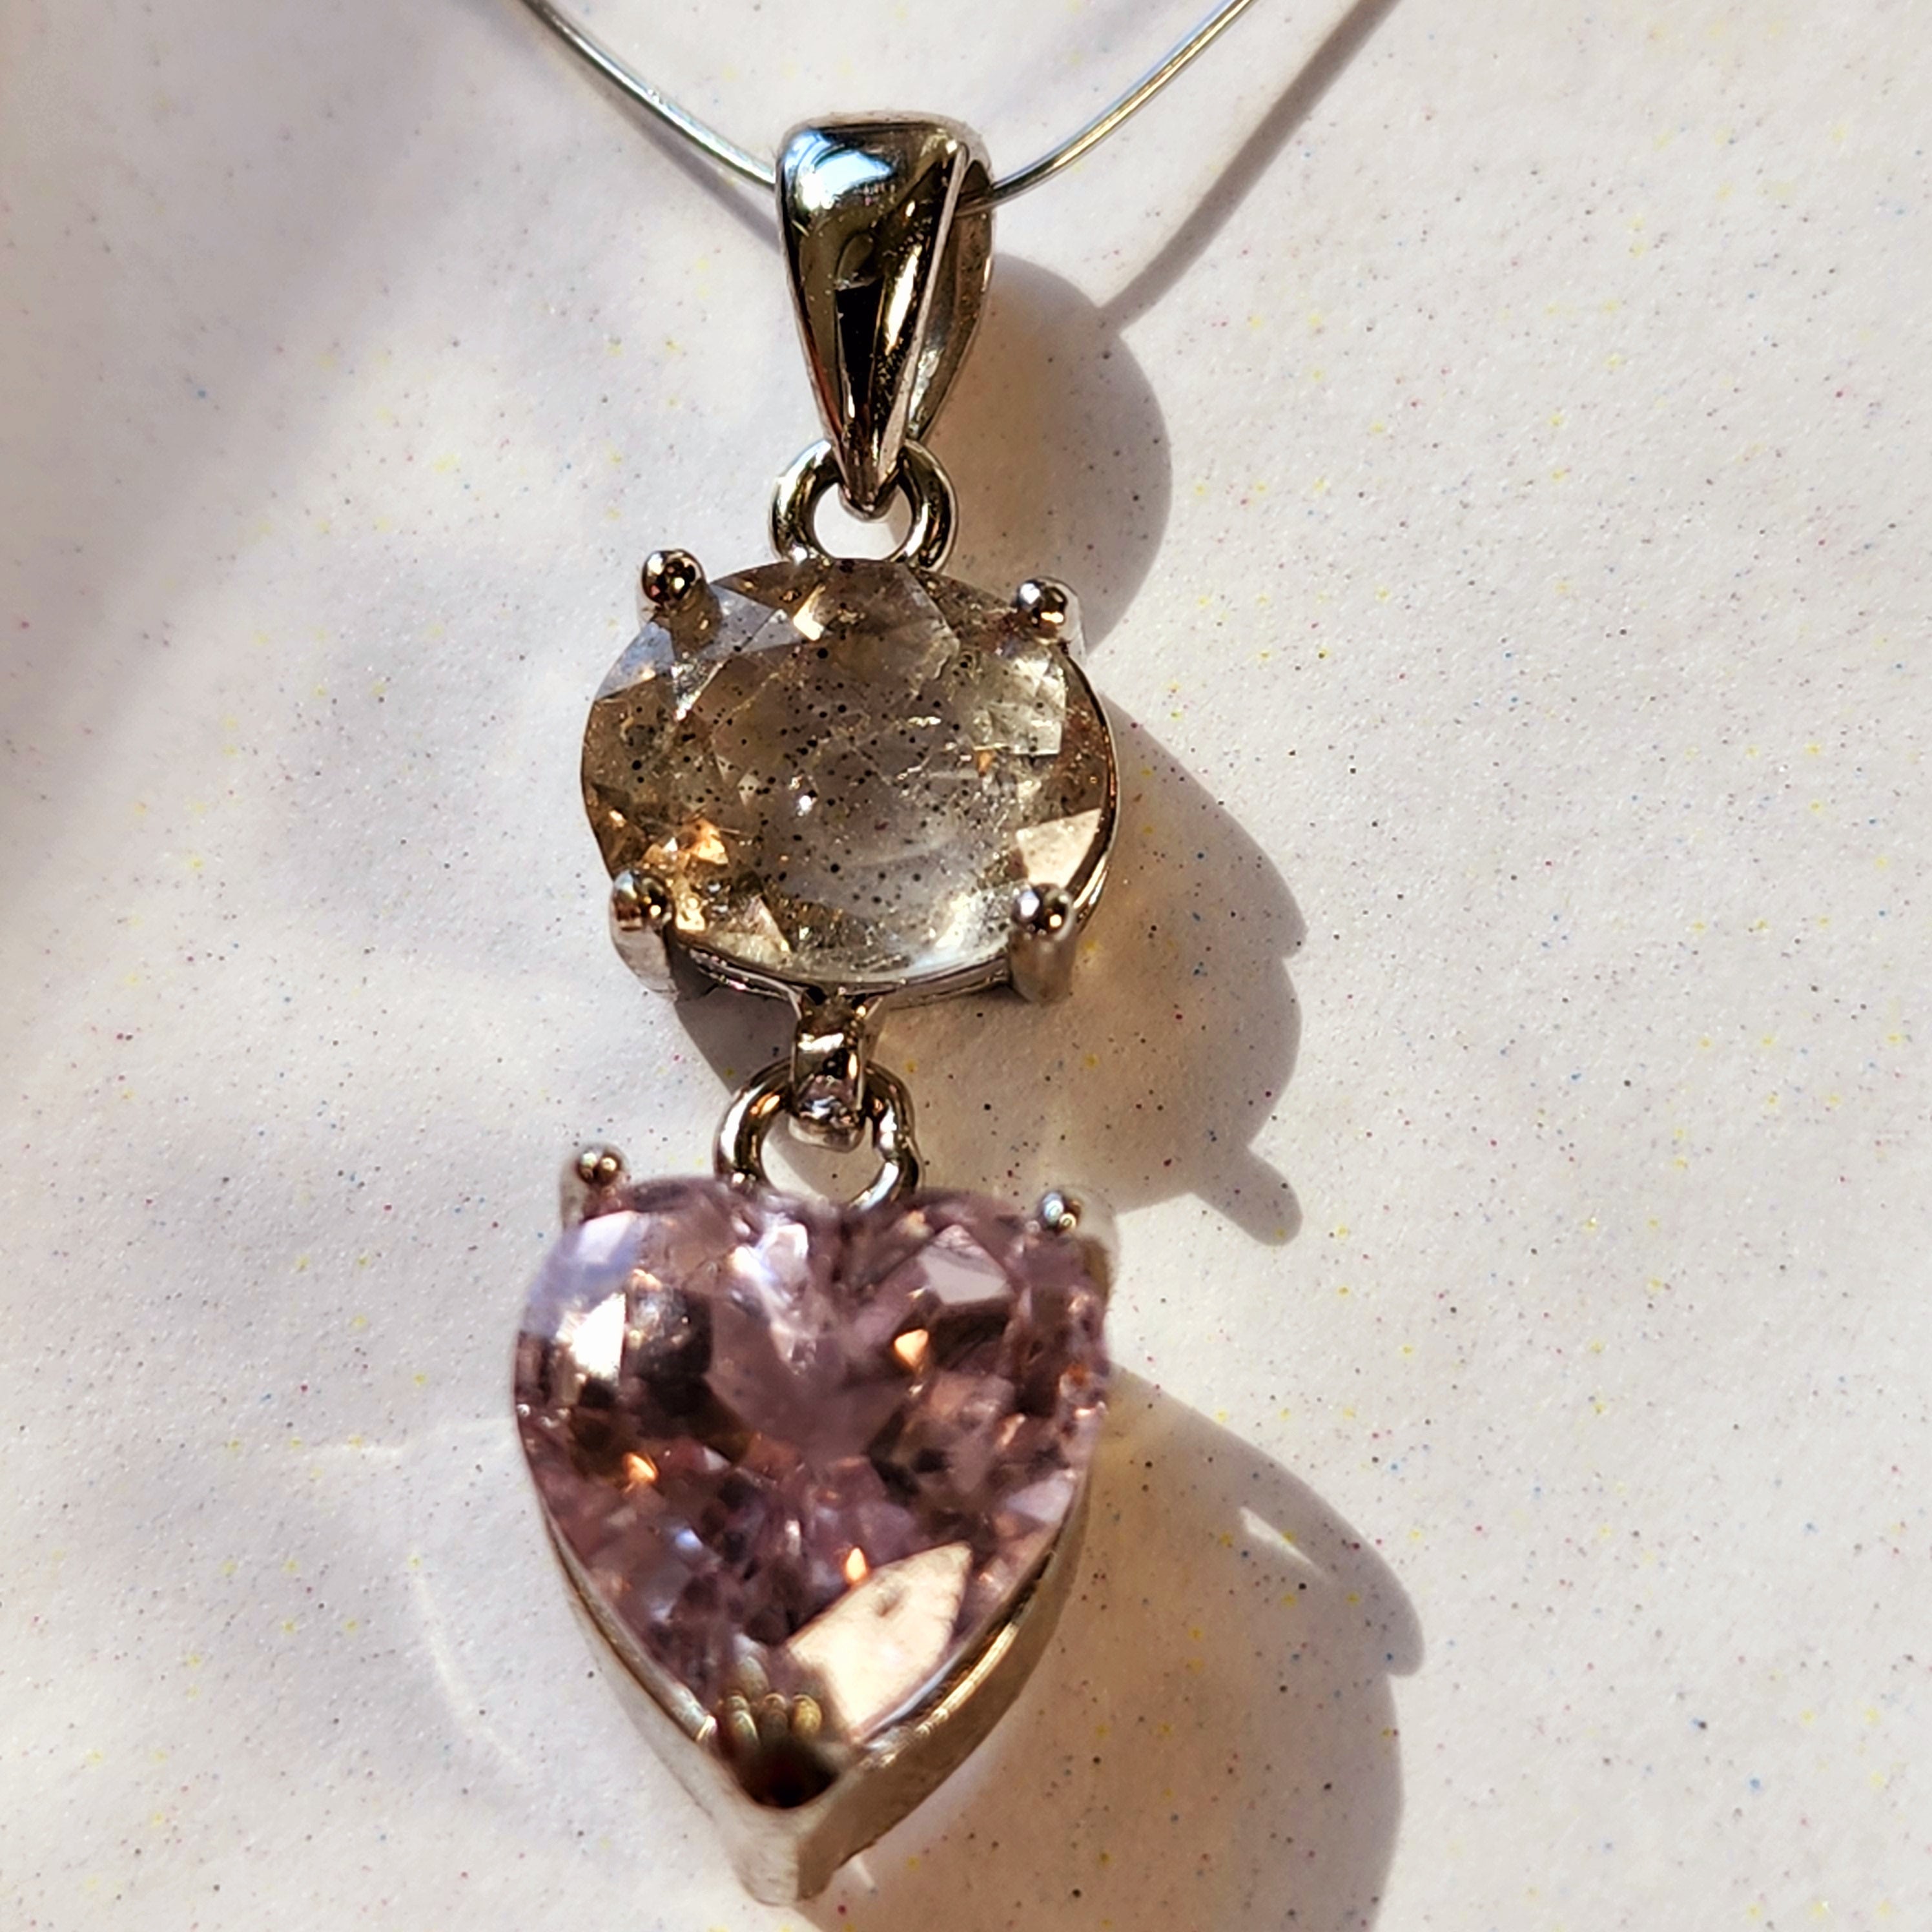 Kunzite with Silver Rutile x Pink Fire Covellite in Quartz Pendant .925 Silver (High Quality) for Healing, Spiritual Awakening and Opening Your Heart to Love